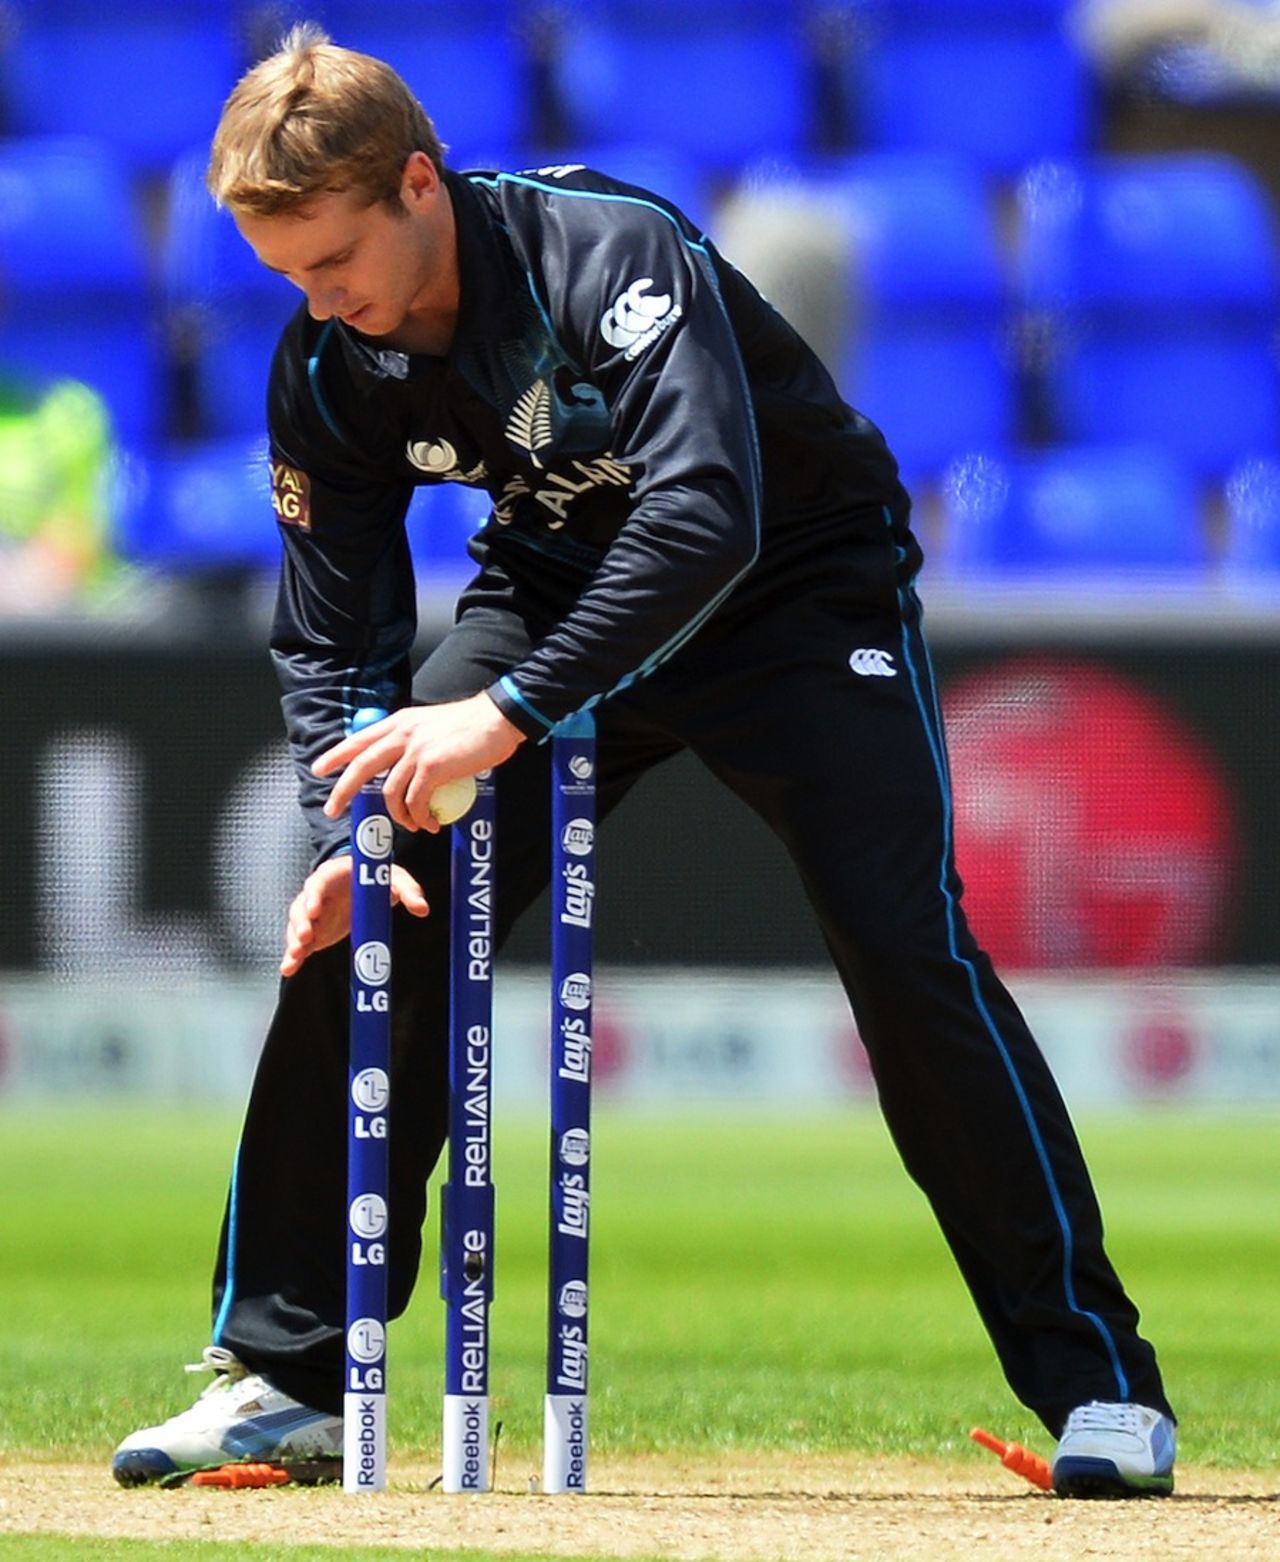 Kane Williamson uproots the stumps to run-out Lahiru Thirimanne, New Zealand v Sri Lanka, Champions Trophy, Group A, Cardiff, June 9, 2013